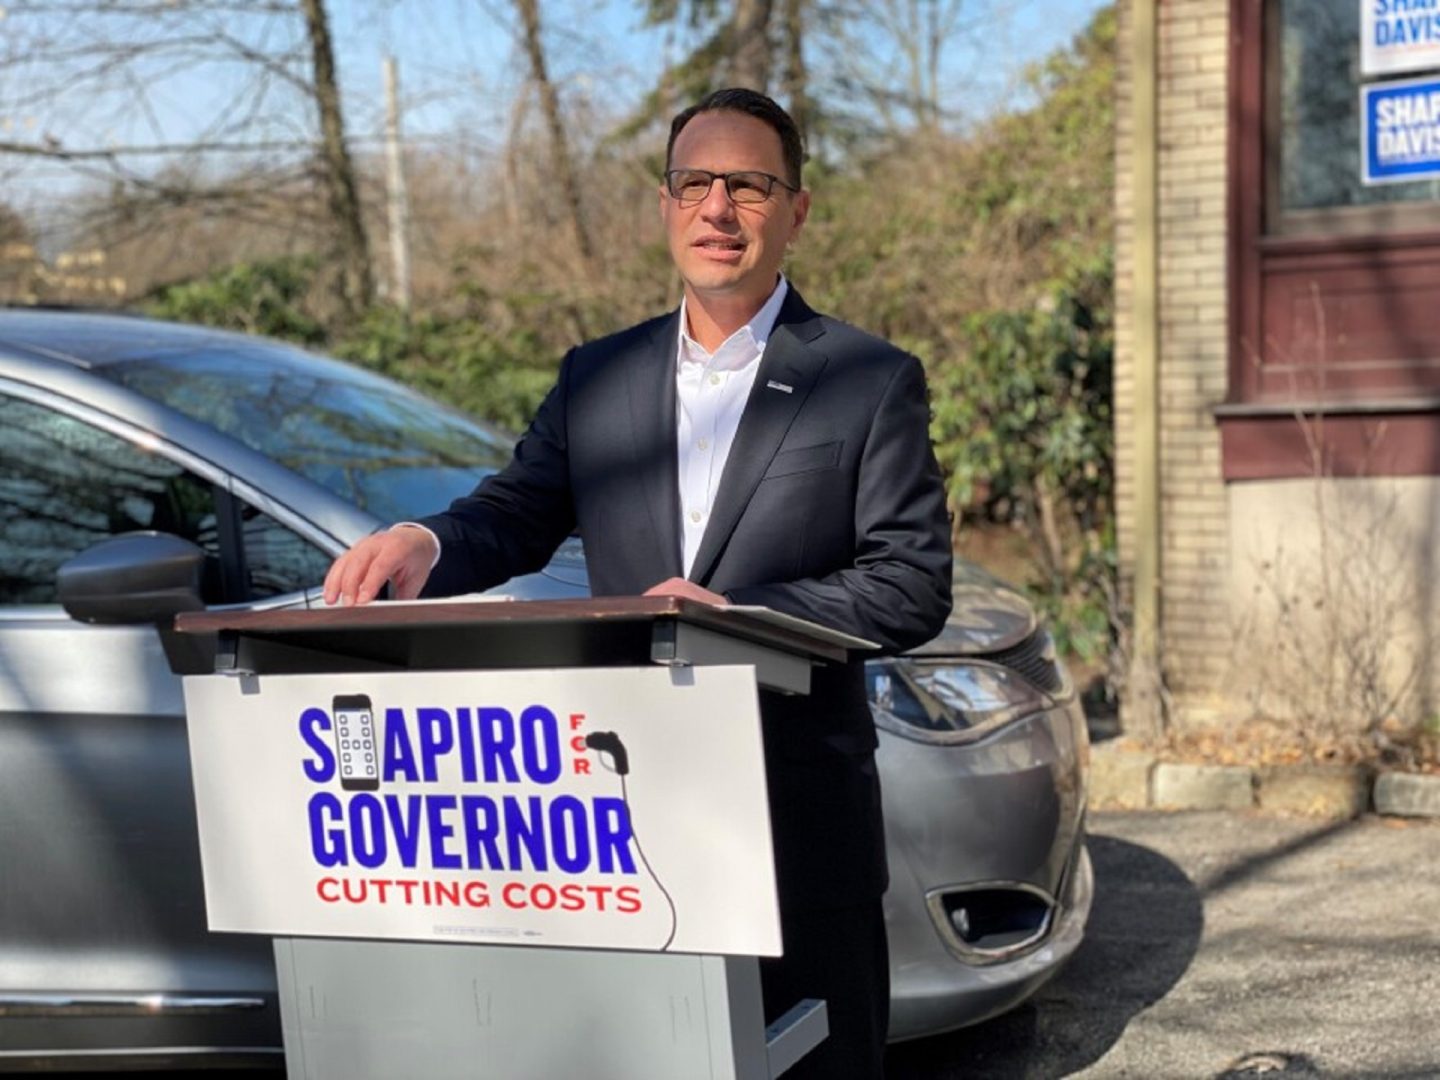 Pennsylvania Attorney General Josh Shapiro made a gubernatorial campaign stop at a home in Forest Hills, Allegheny County on March 18, 2022.